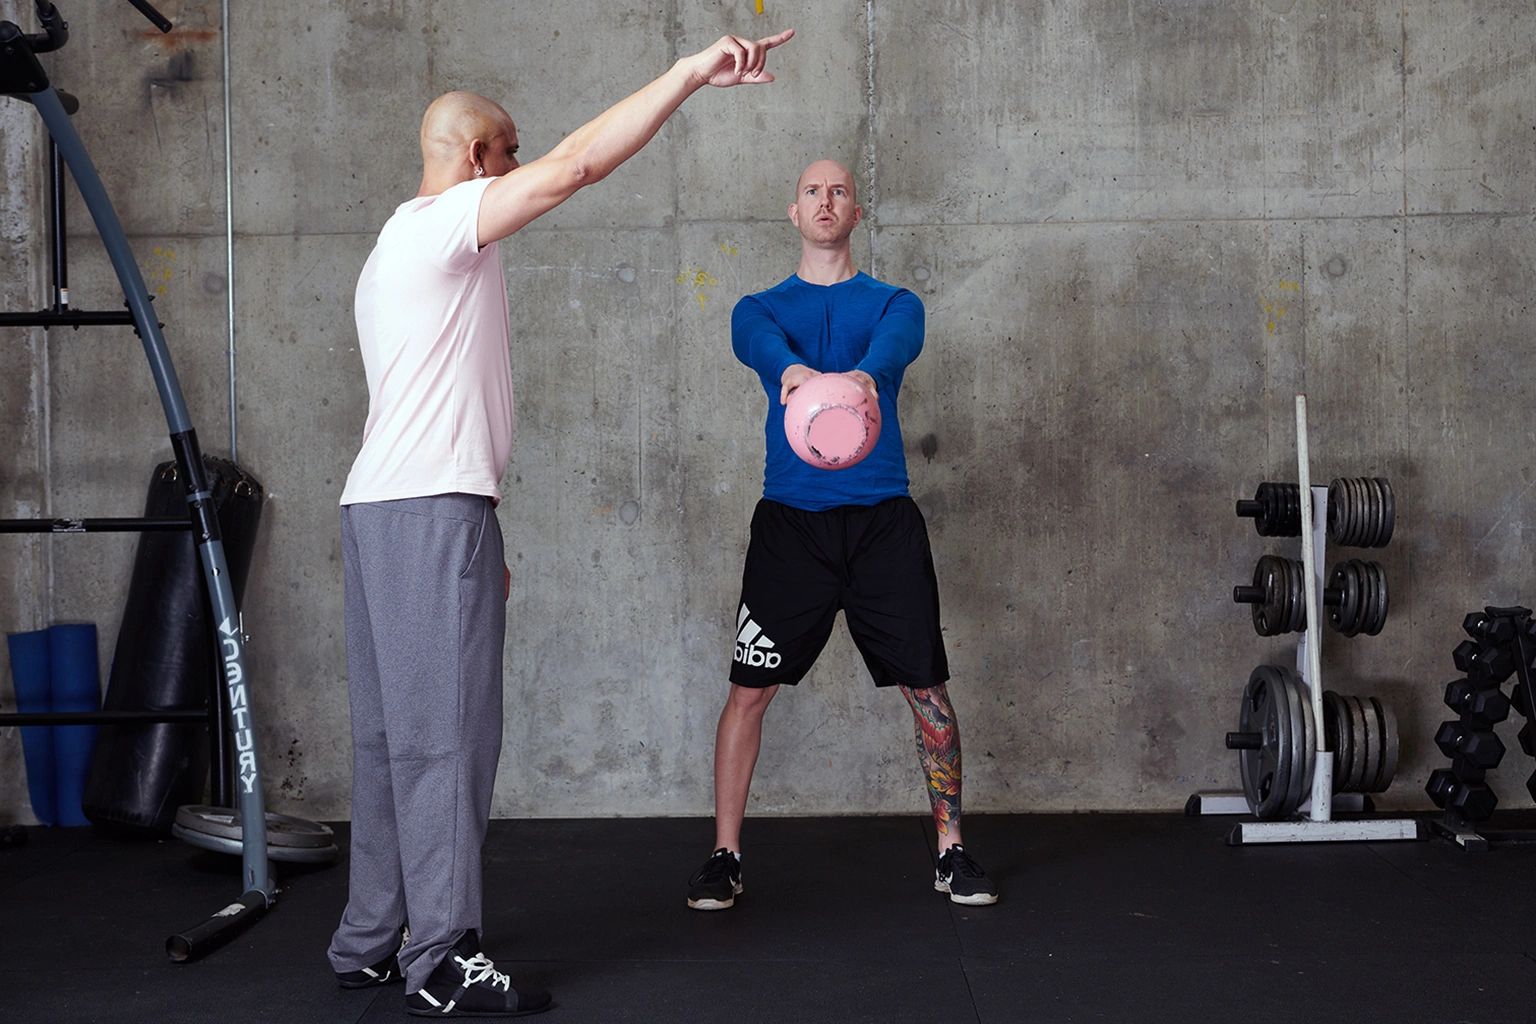 Vancouver Personal Trainer working with his client in the gym.